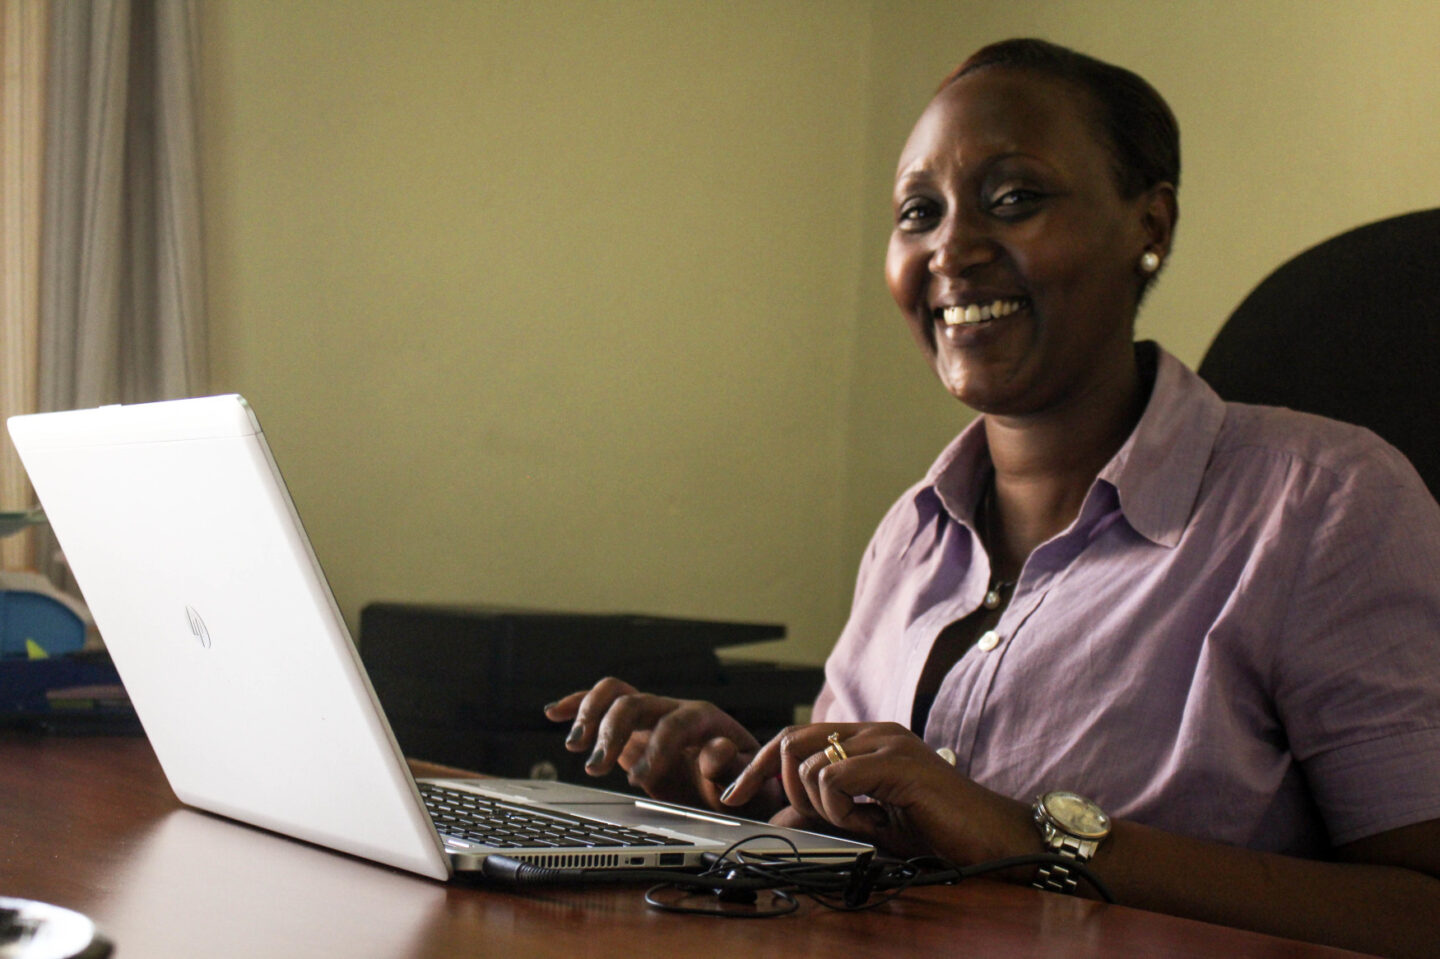 A staff member is pictured at her computer